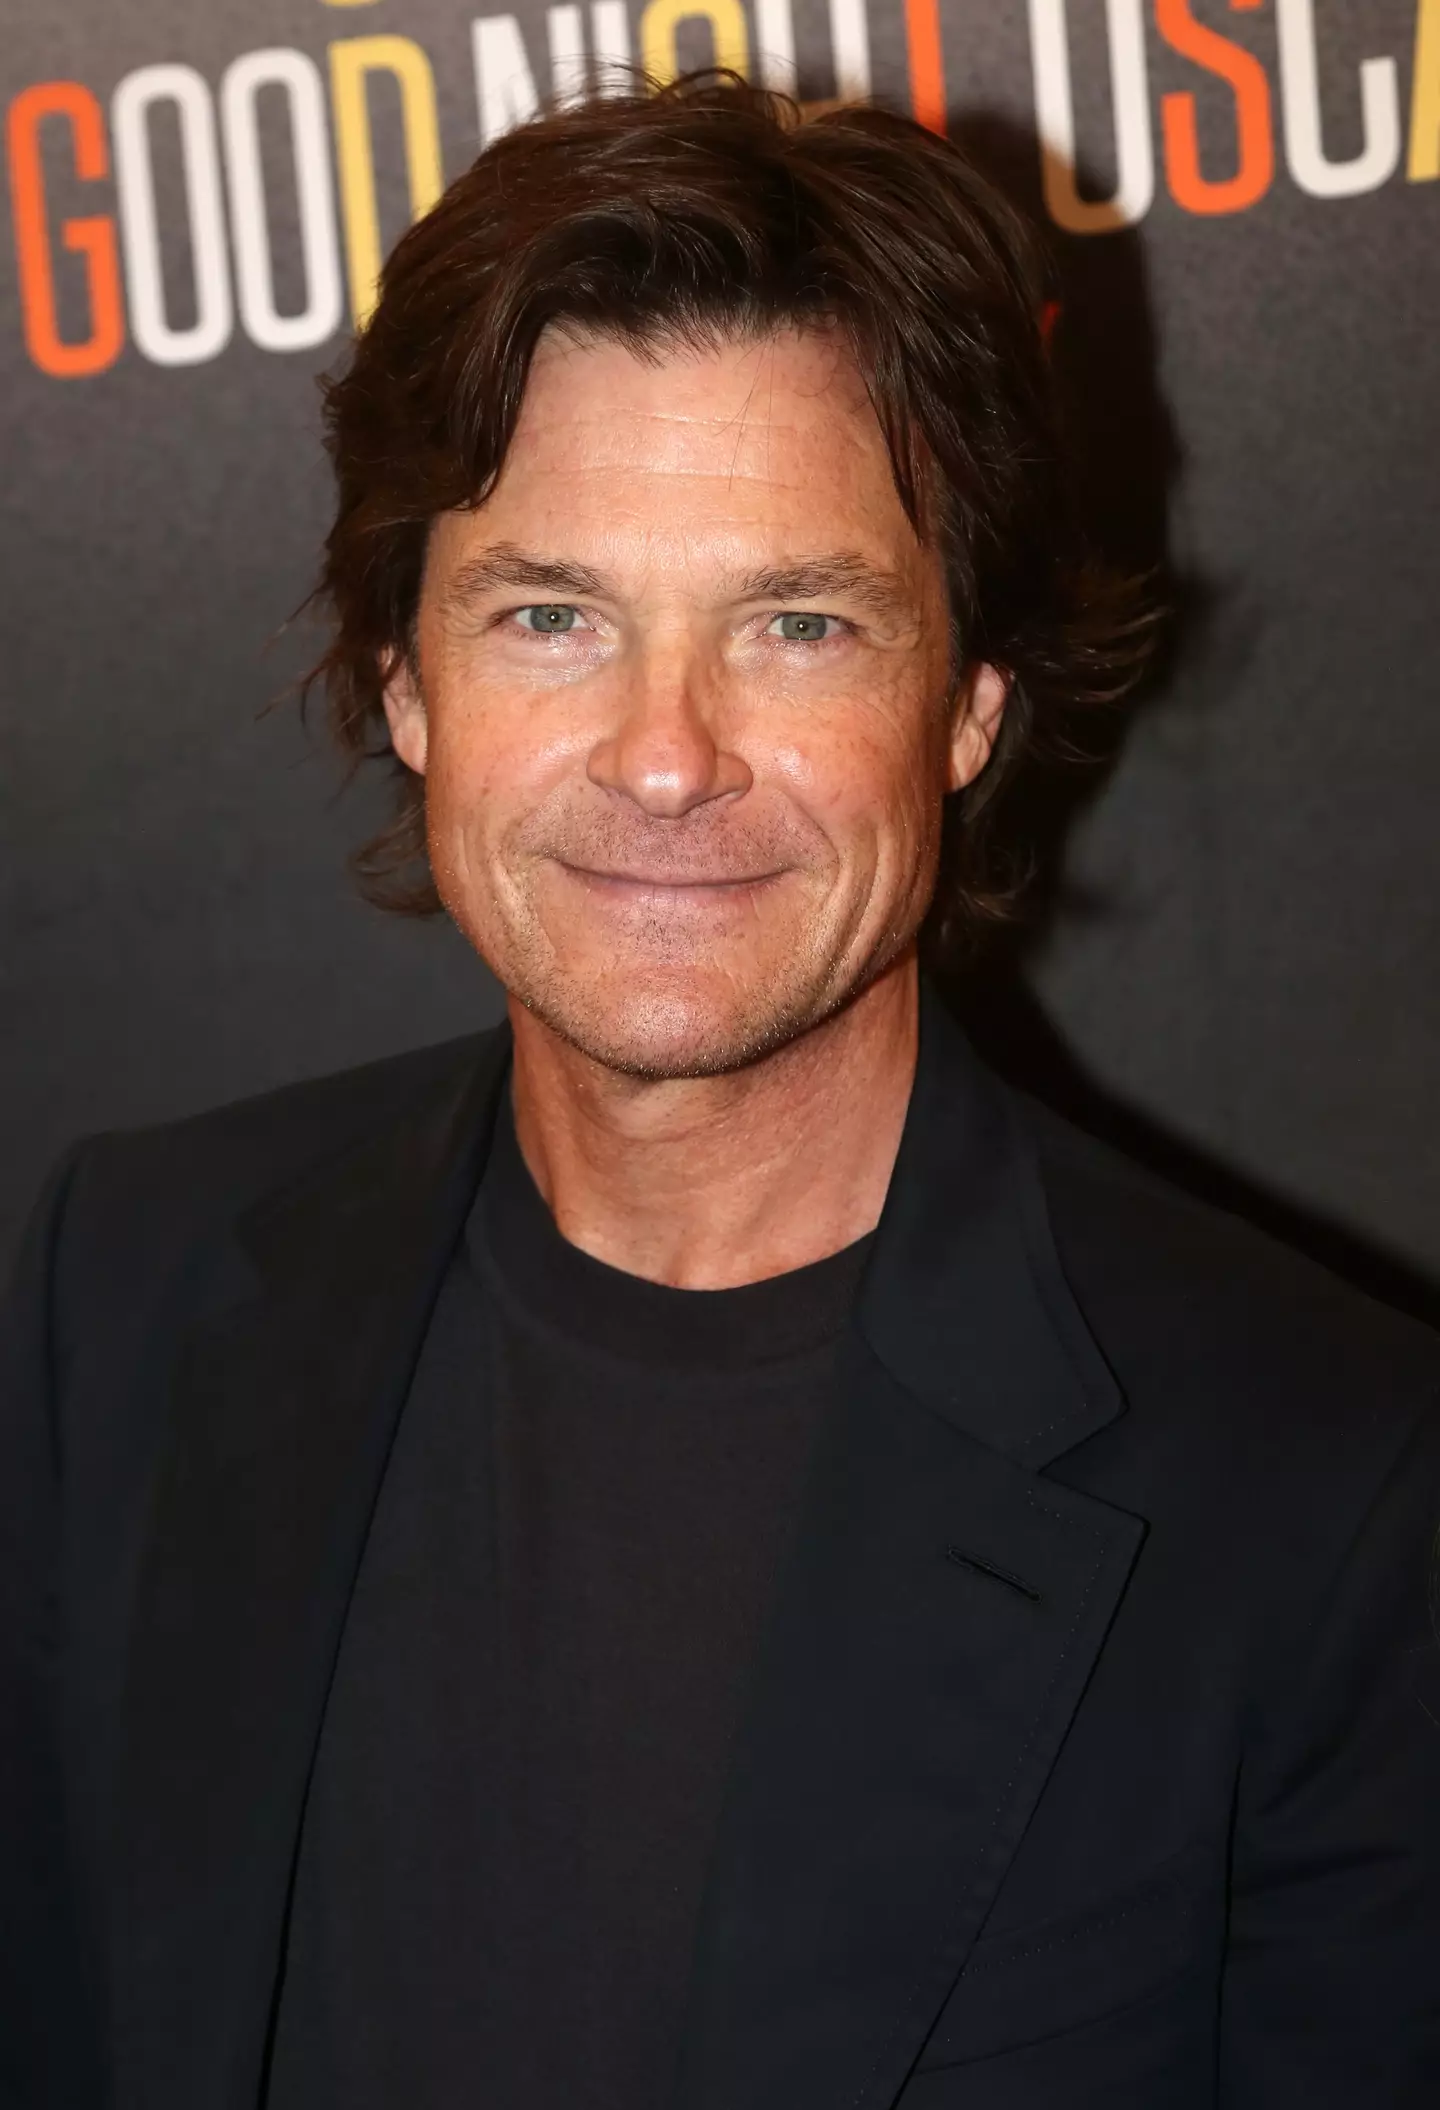 Jason Bateman said the interview 'wasn't one of his prouder moments'.